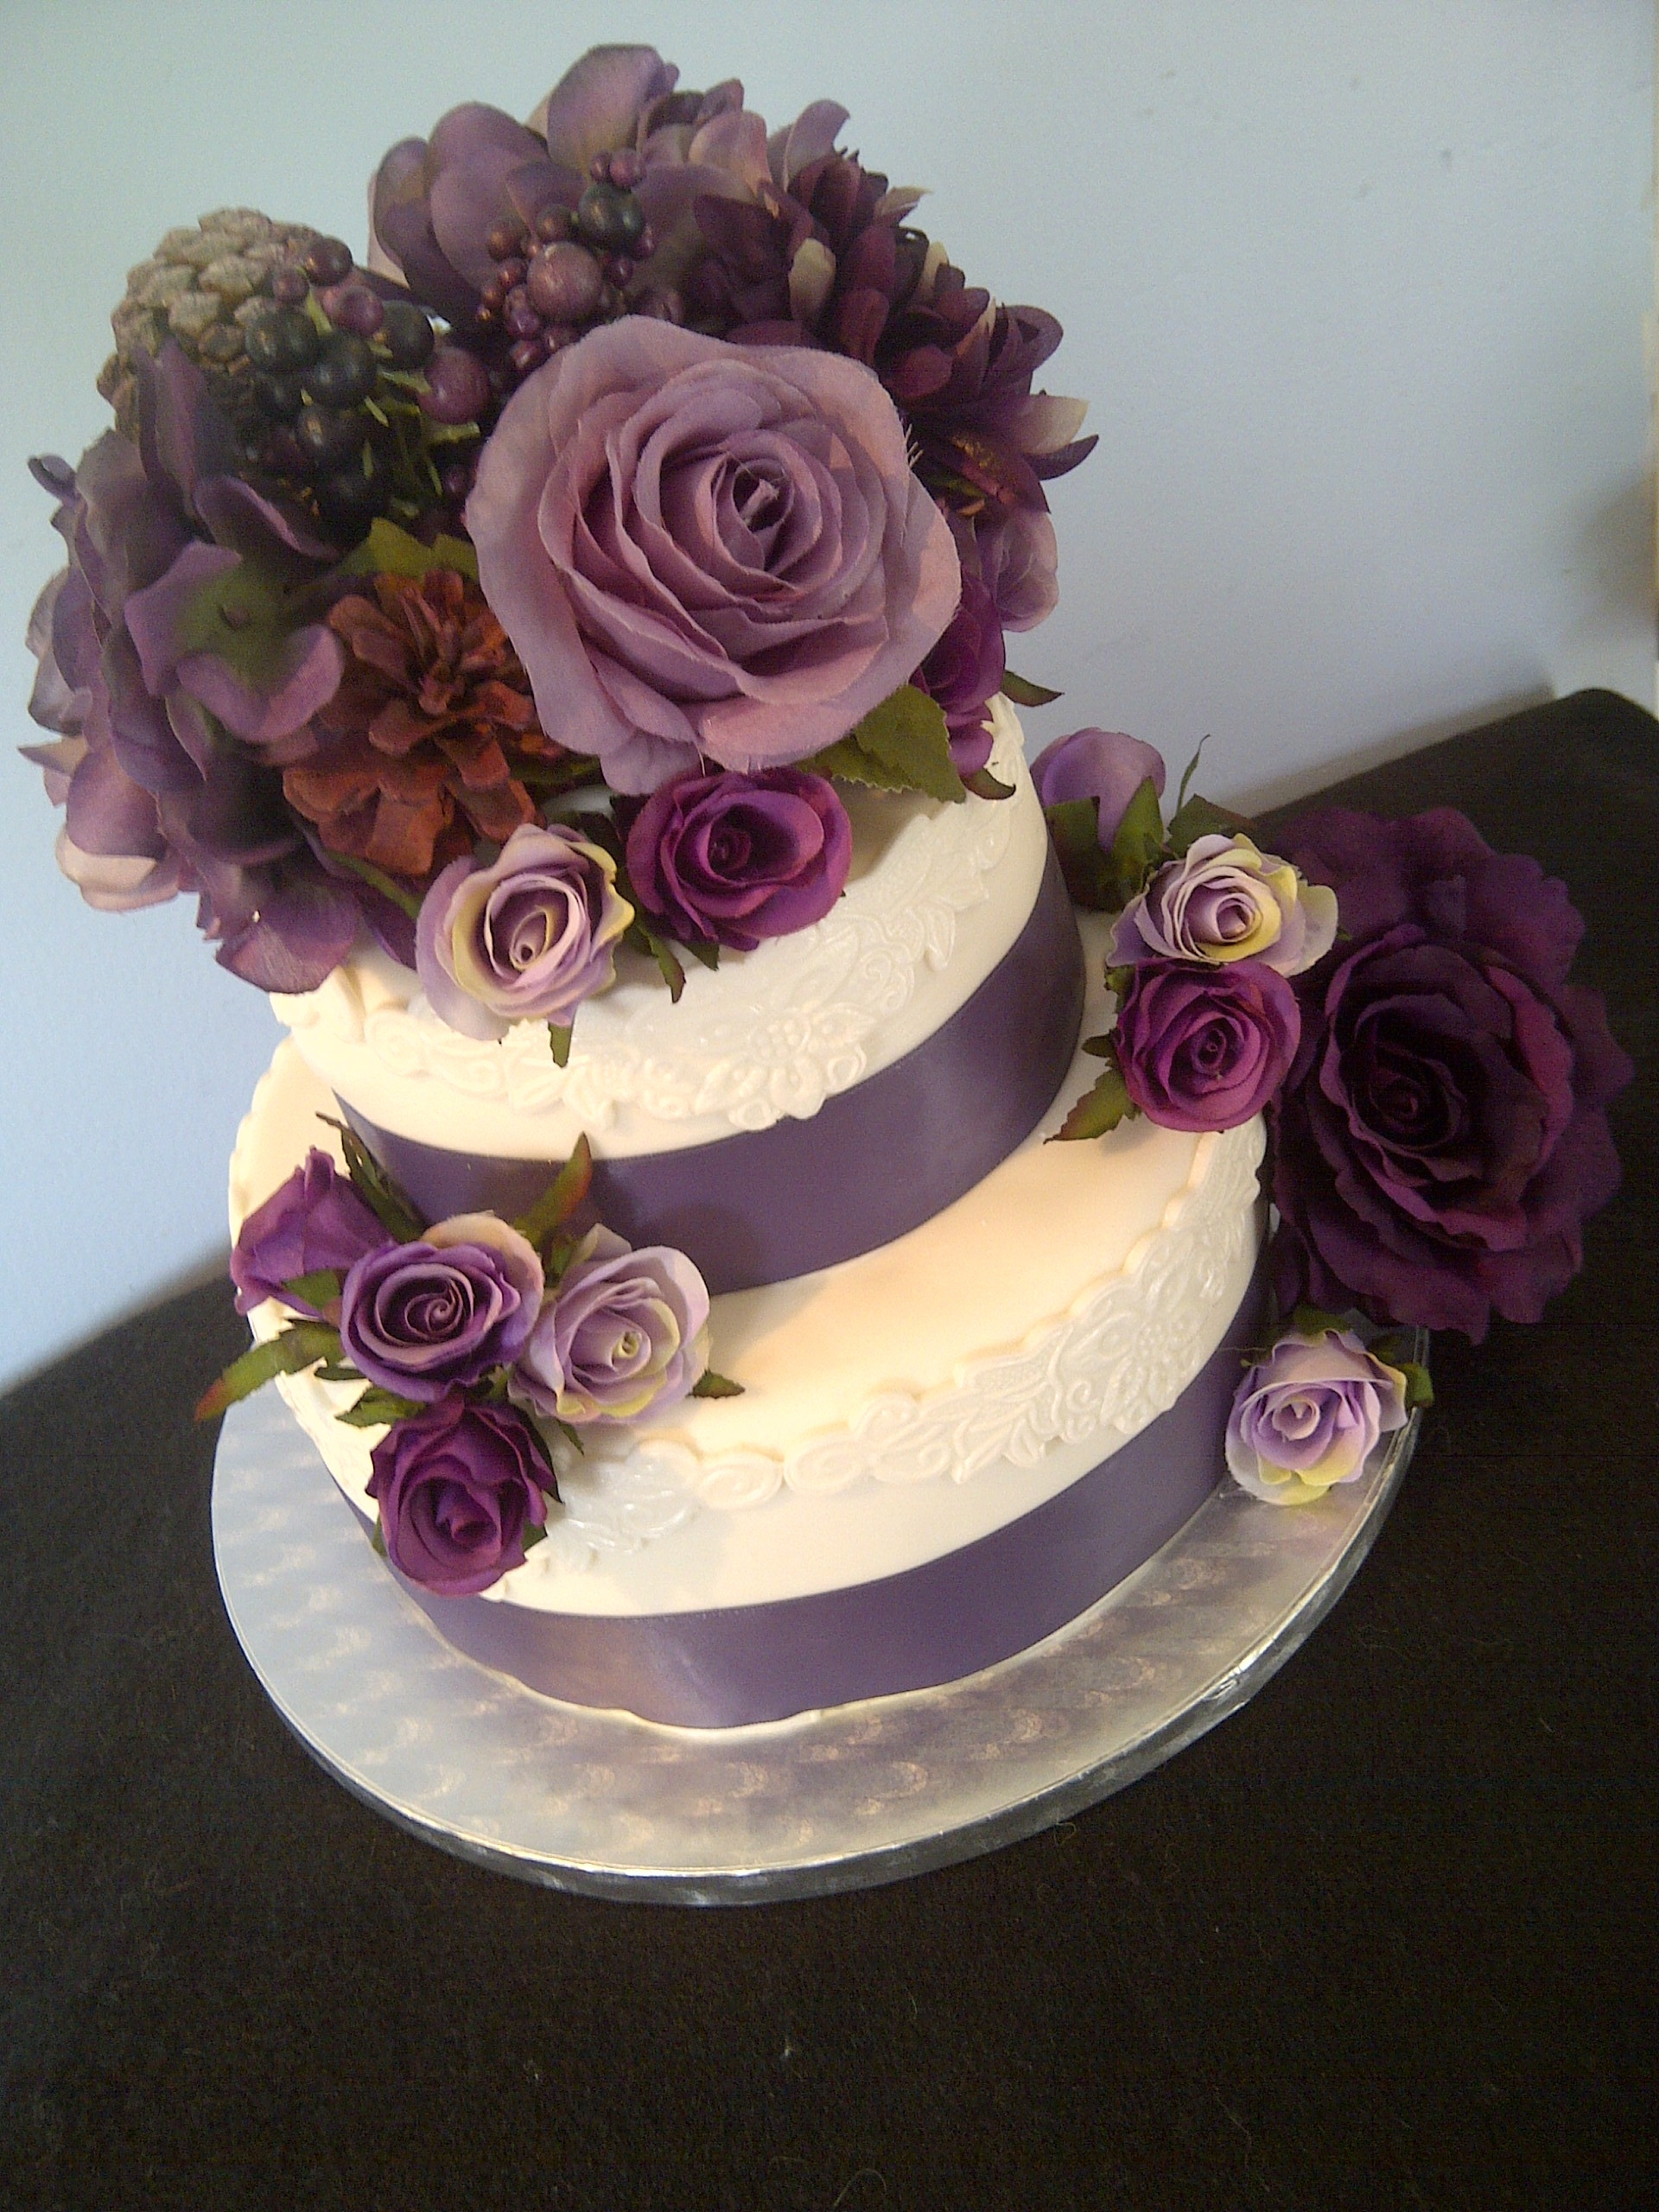 Flowers For Wedding Cakes Artificial
 Wedding Cake With Silk Flowers Vanilla Cake With Swiss